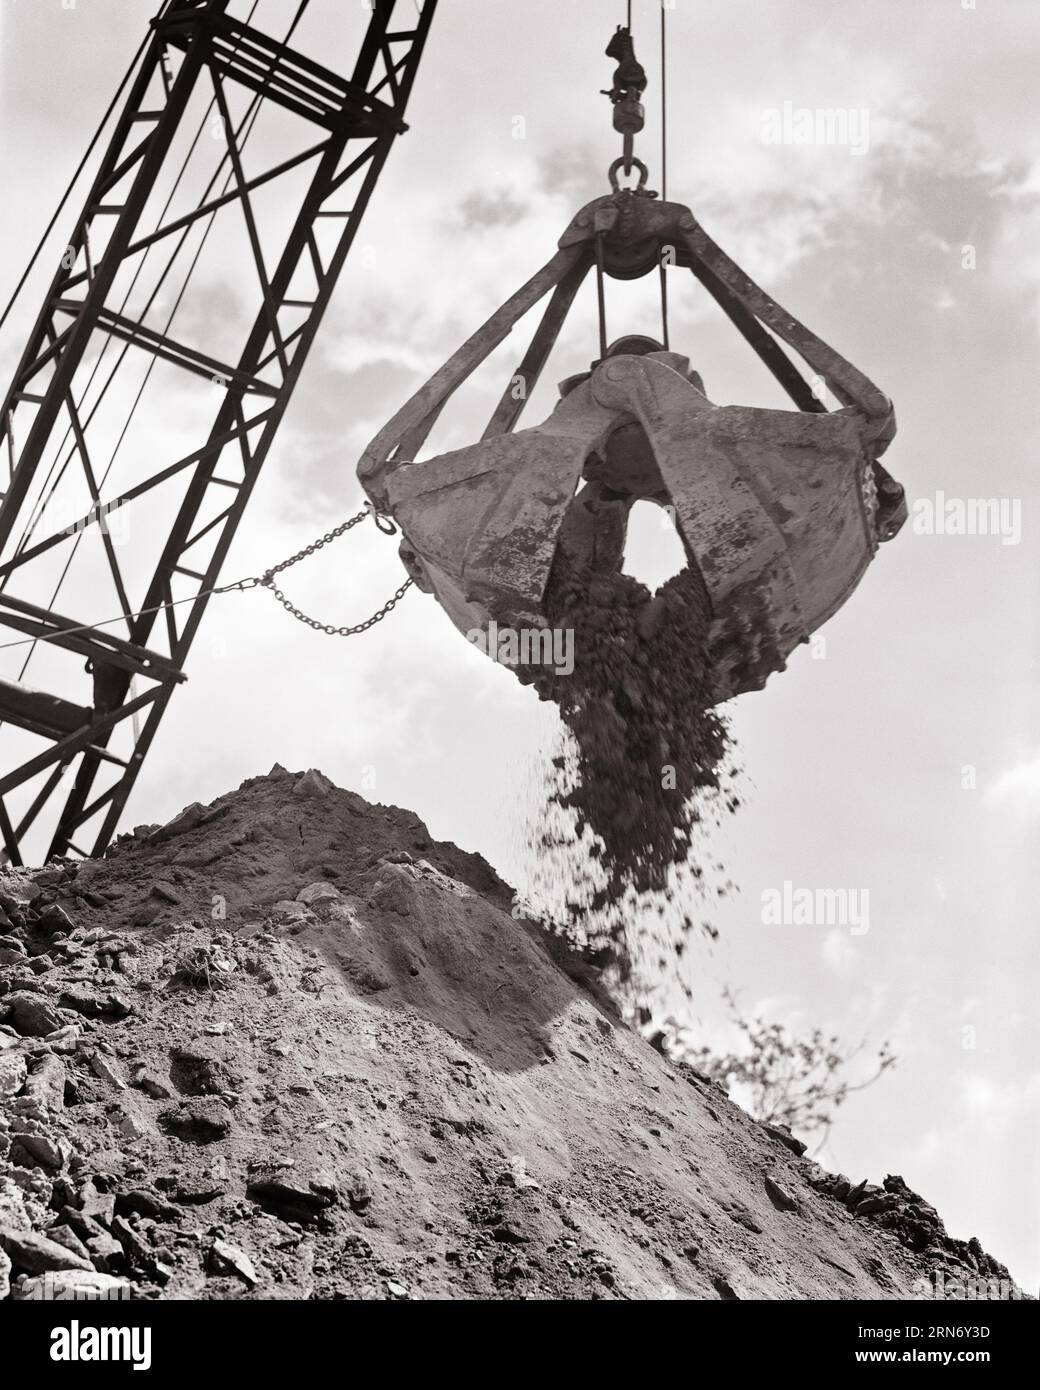 1950s CRANE OPERATING A CLAMSHELL BUCKET DUMPING A LOAD OF EARTH DURING EXCAVATING - i1667 HAR001 HARS OLD FASHIONED Stock Photo